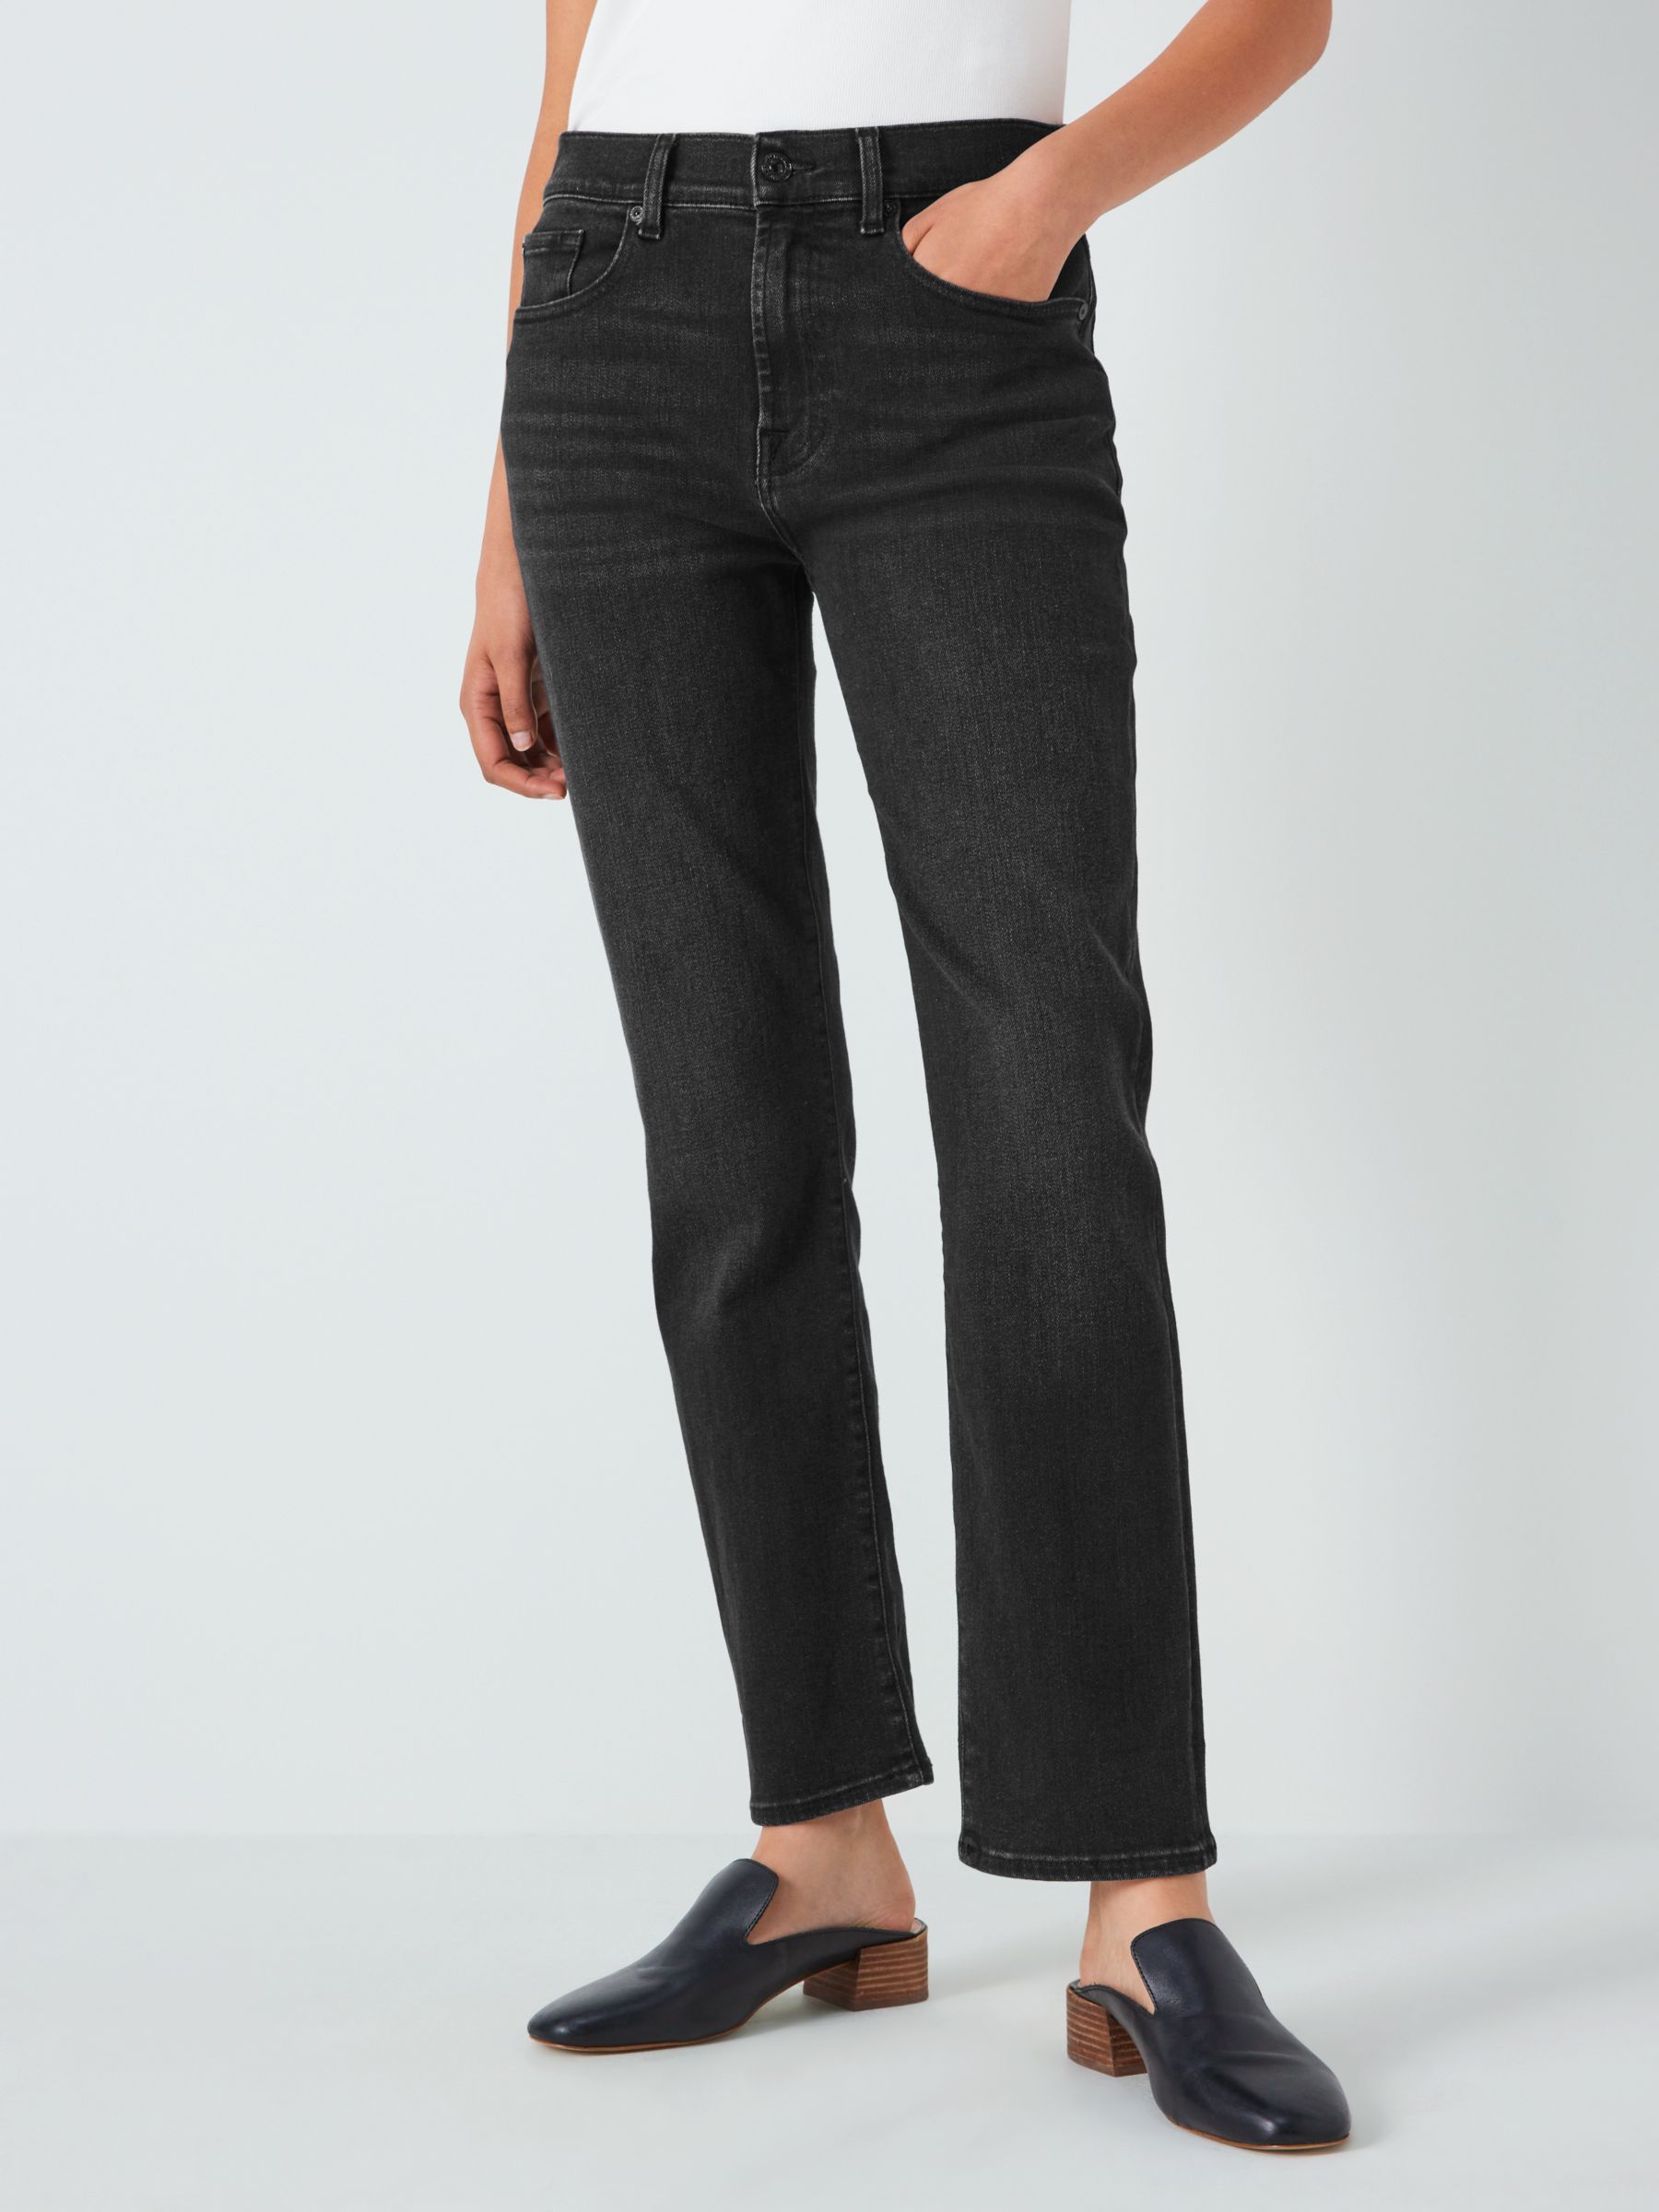 7 For All Mankind Plain Relaxed Skinny Jeans, Black at John Lewis ...